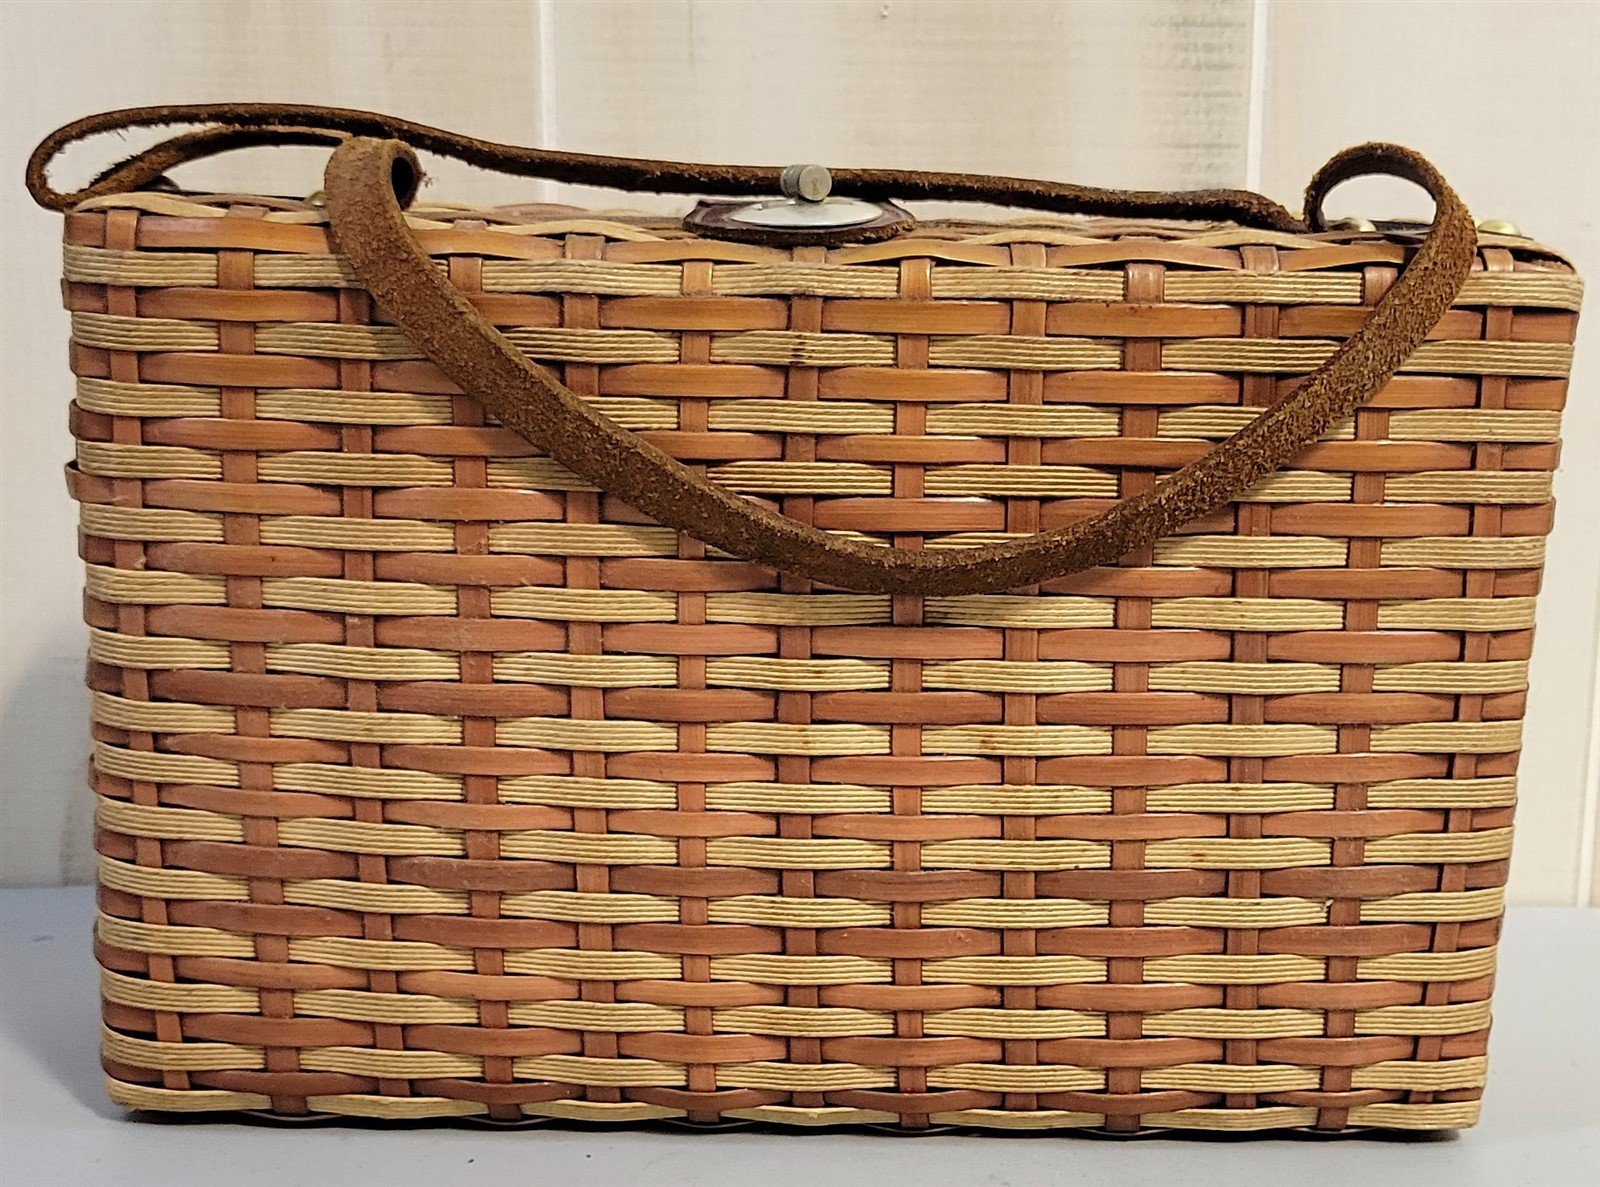 Vintage Wicker Basket Weave Handbag Purse Tote With Feet Leather Trim and Strap